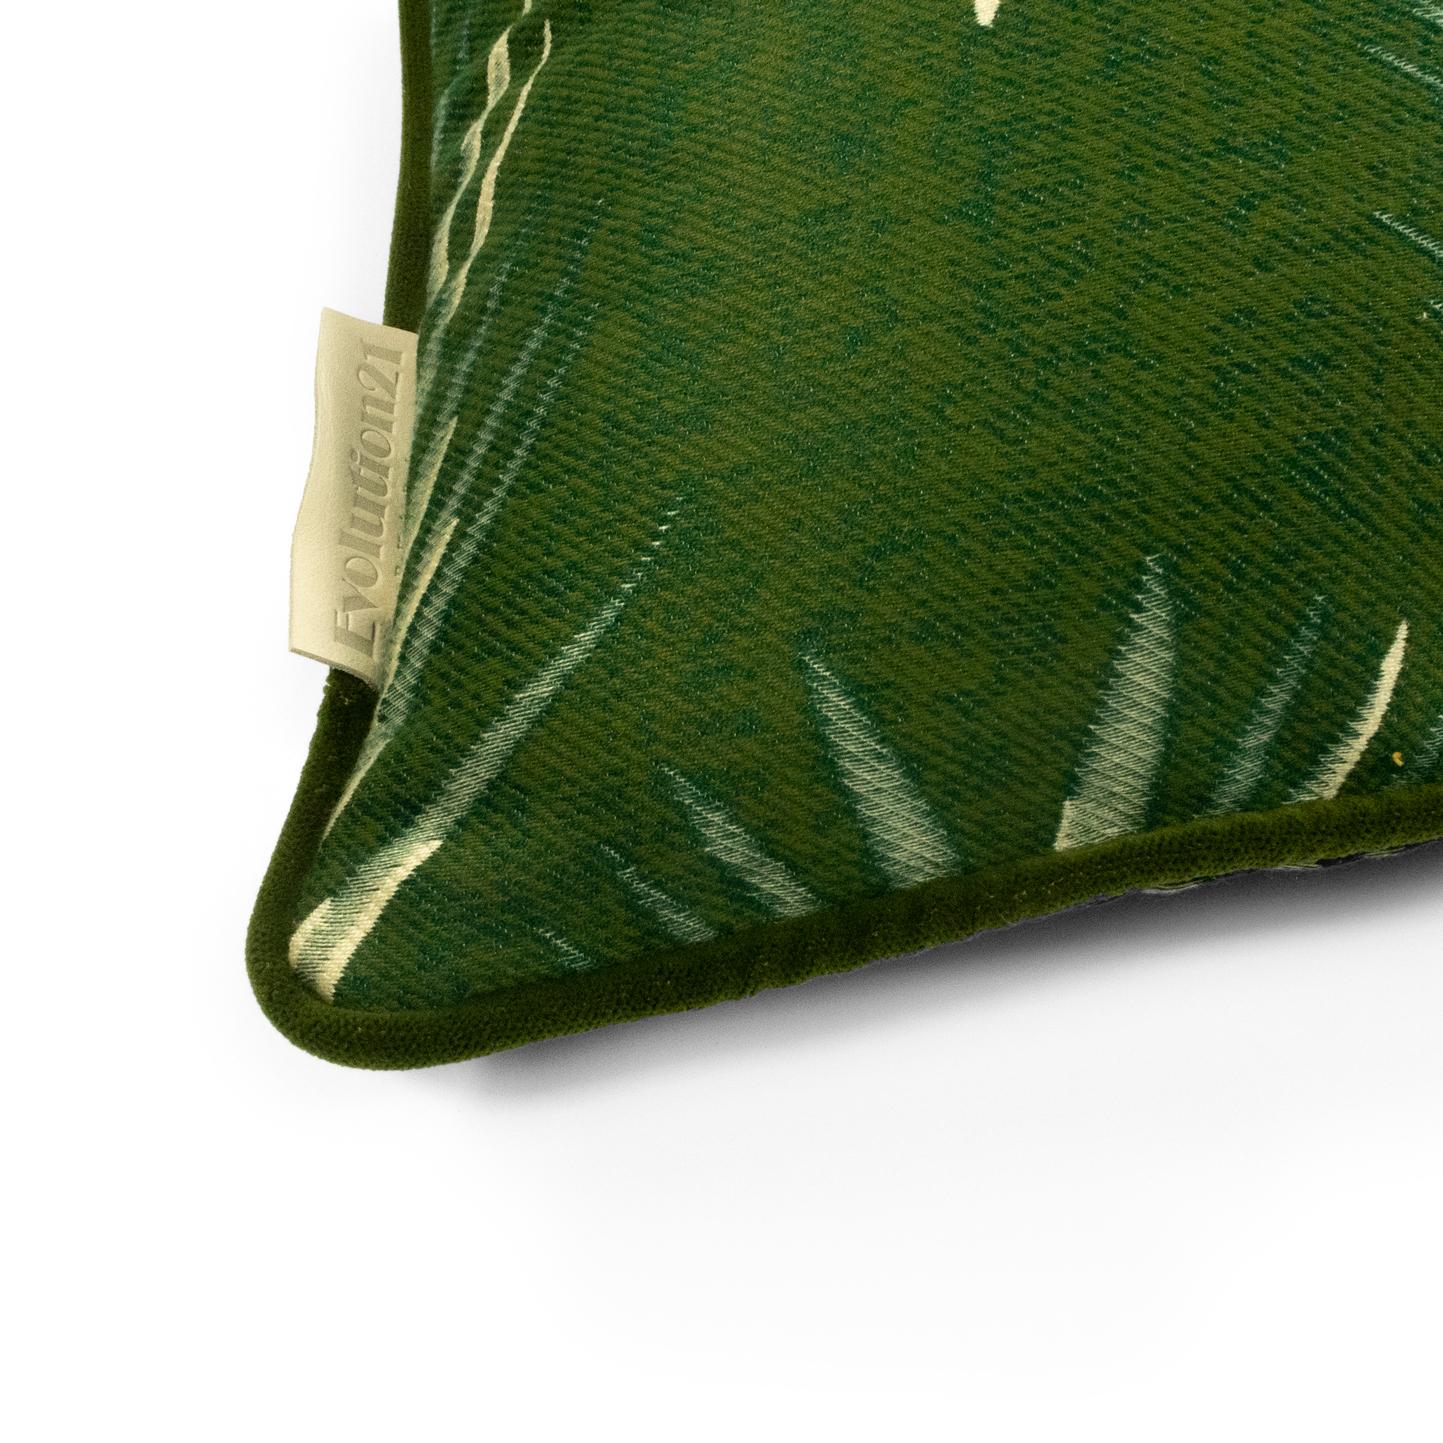 A tropical pattern in subtle tones, our Bamboo Leaf fabric upholstery is warm and playful. Harking to a different environment, the cushion helps to bring a natural look to both interior and exterior settings. 

Pick out similar colours in